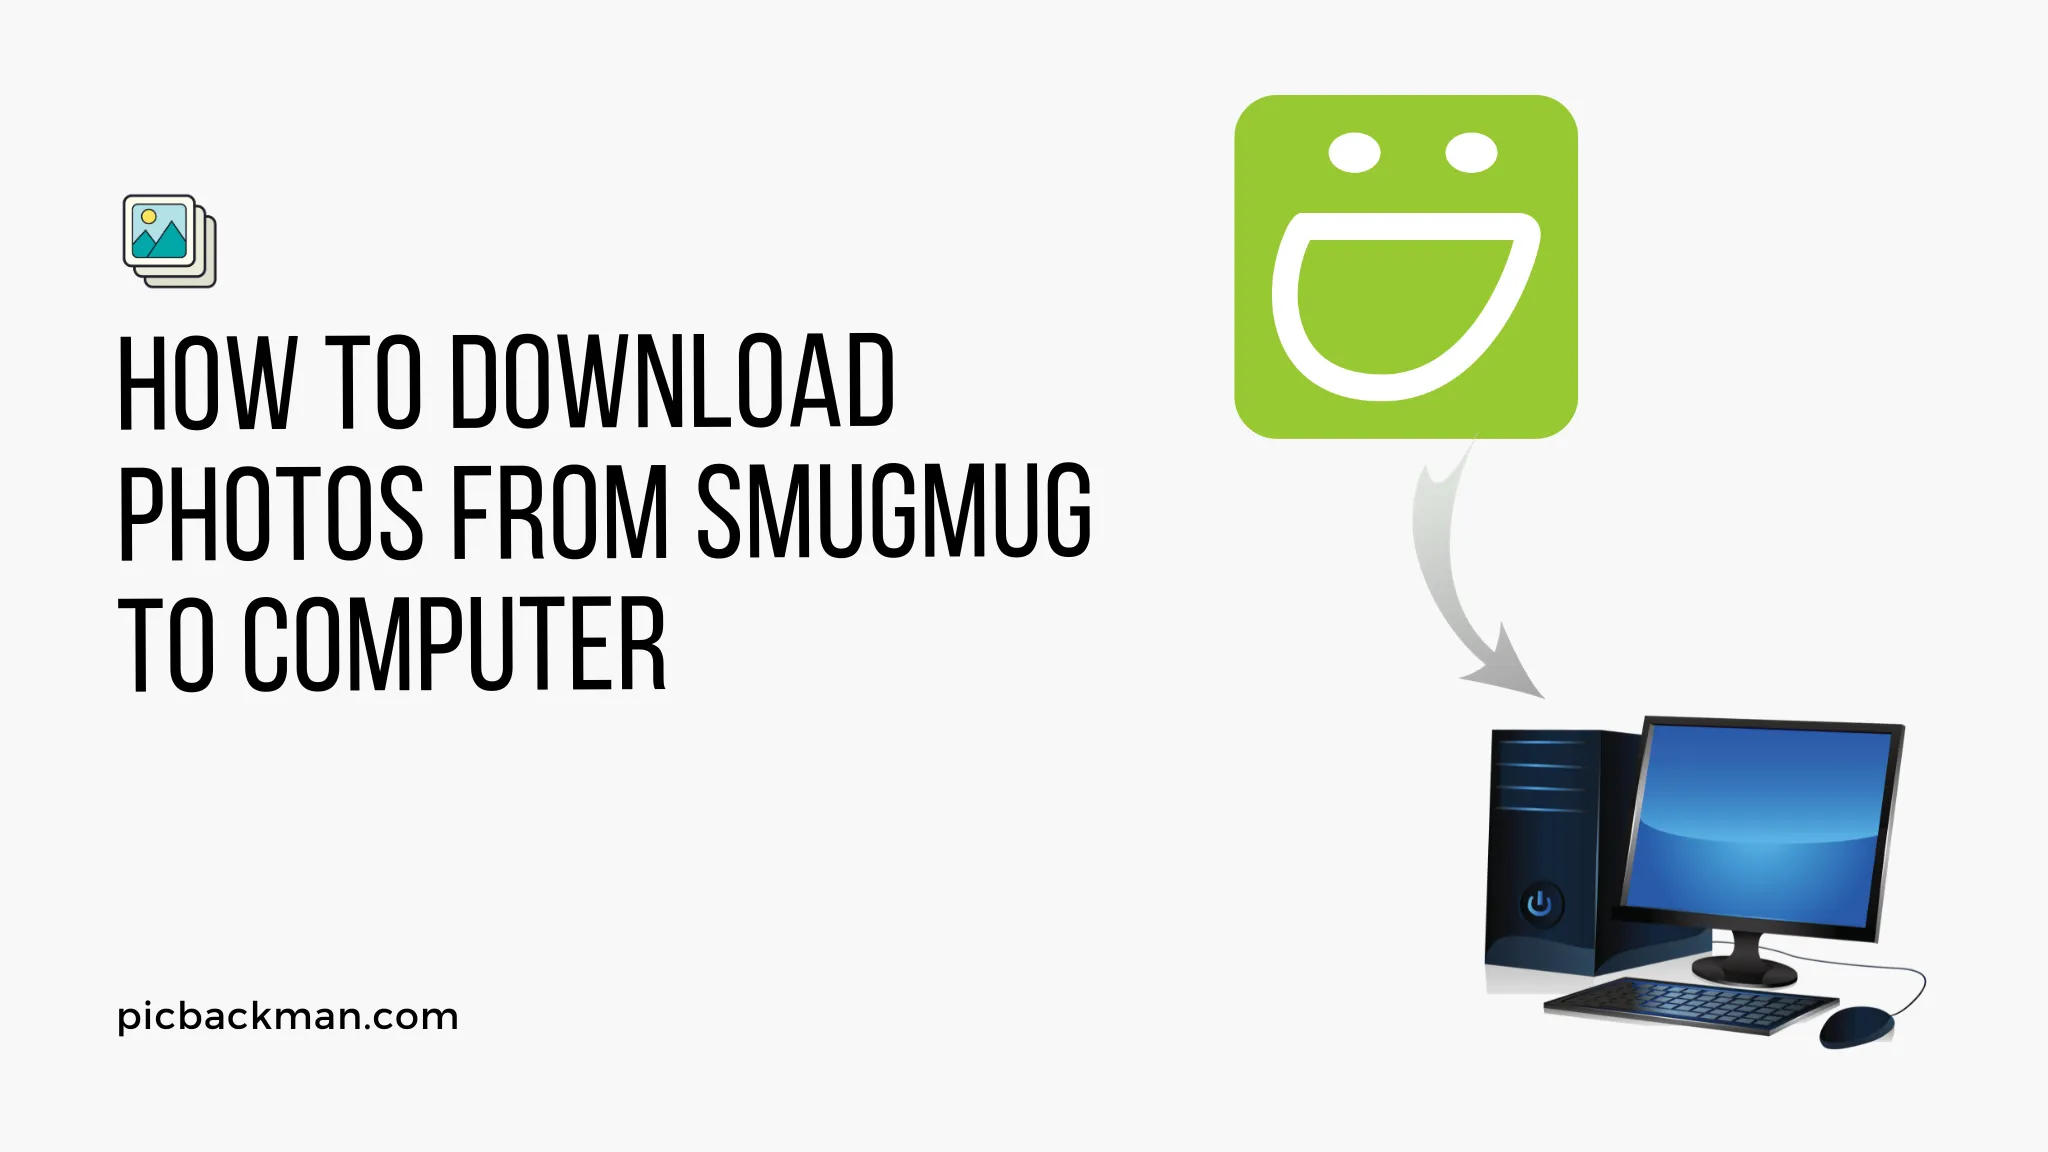 How to download photos from Smugmug to computer